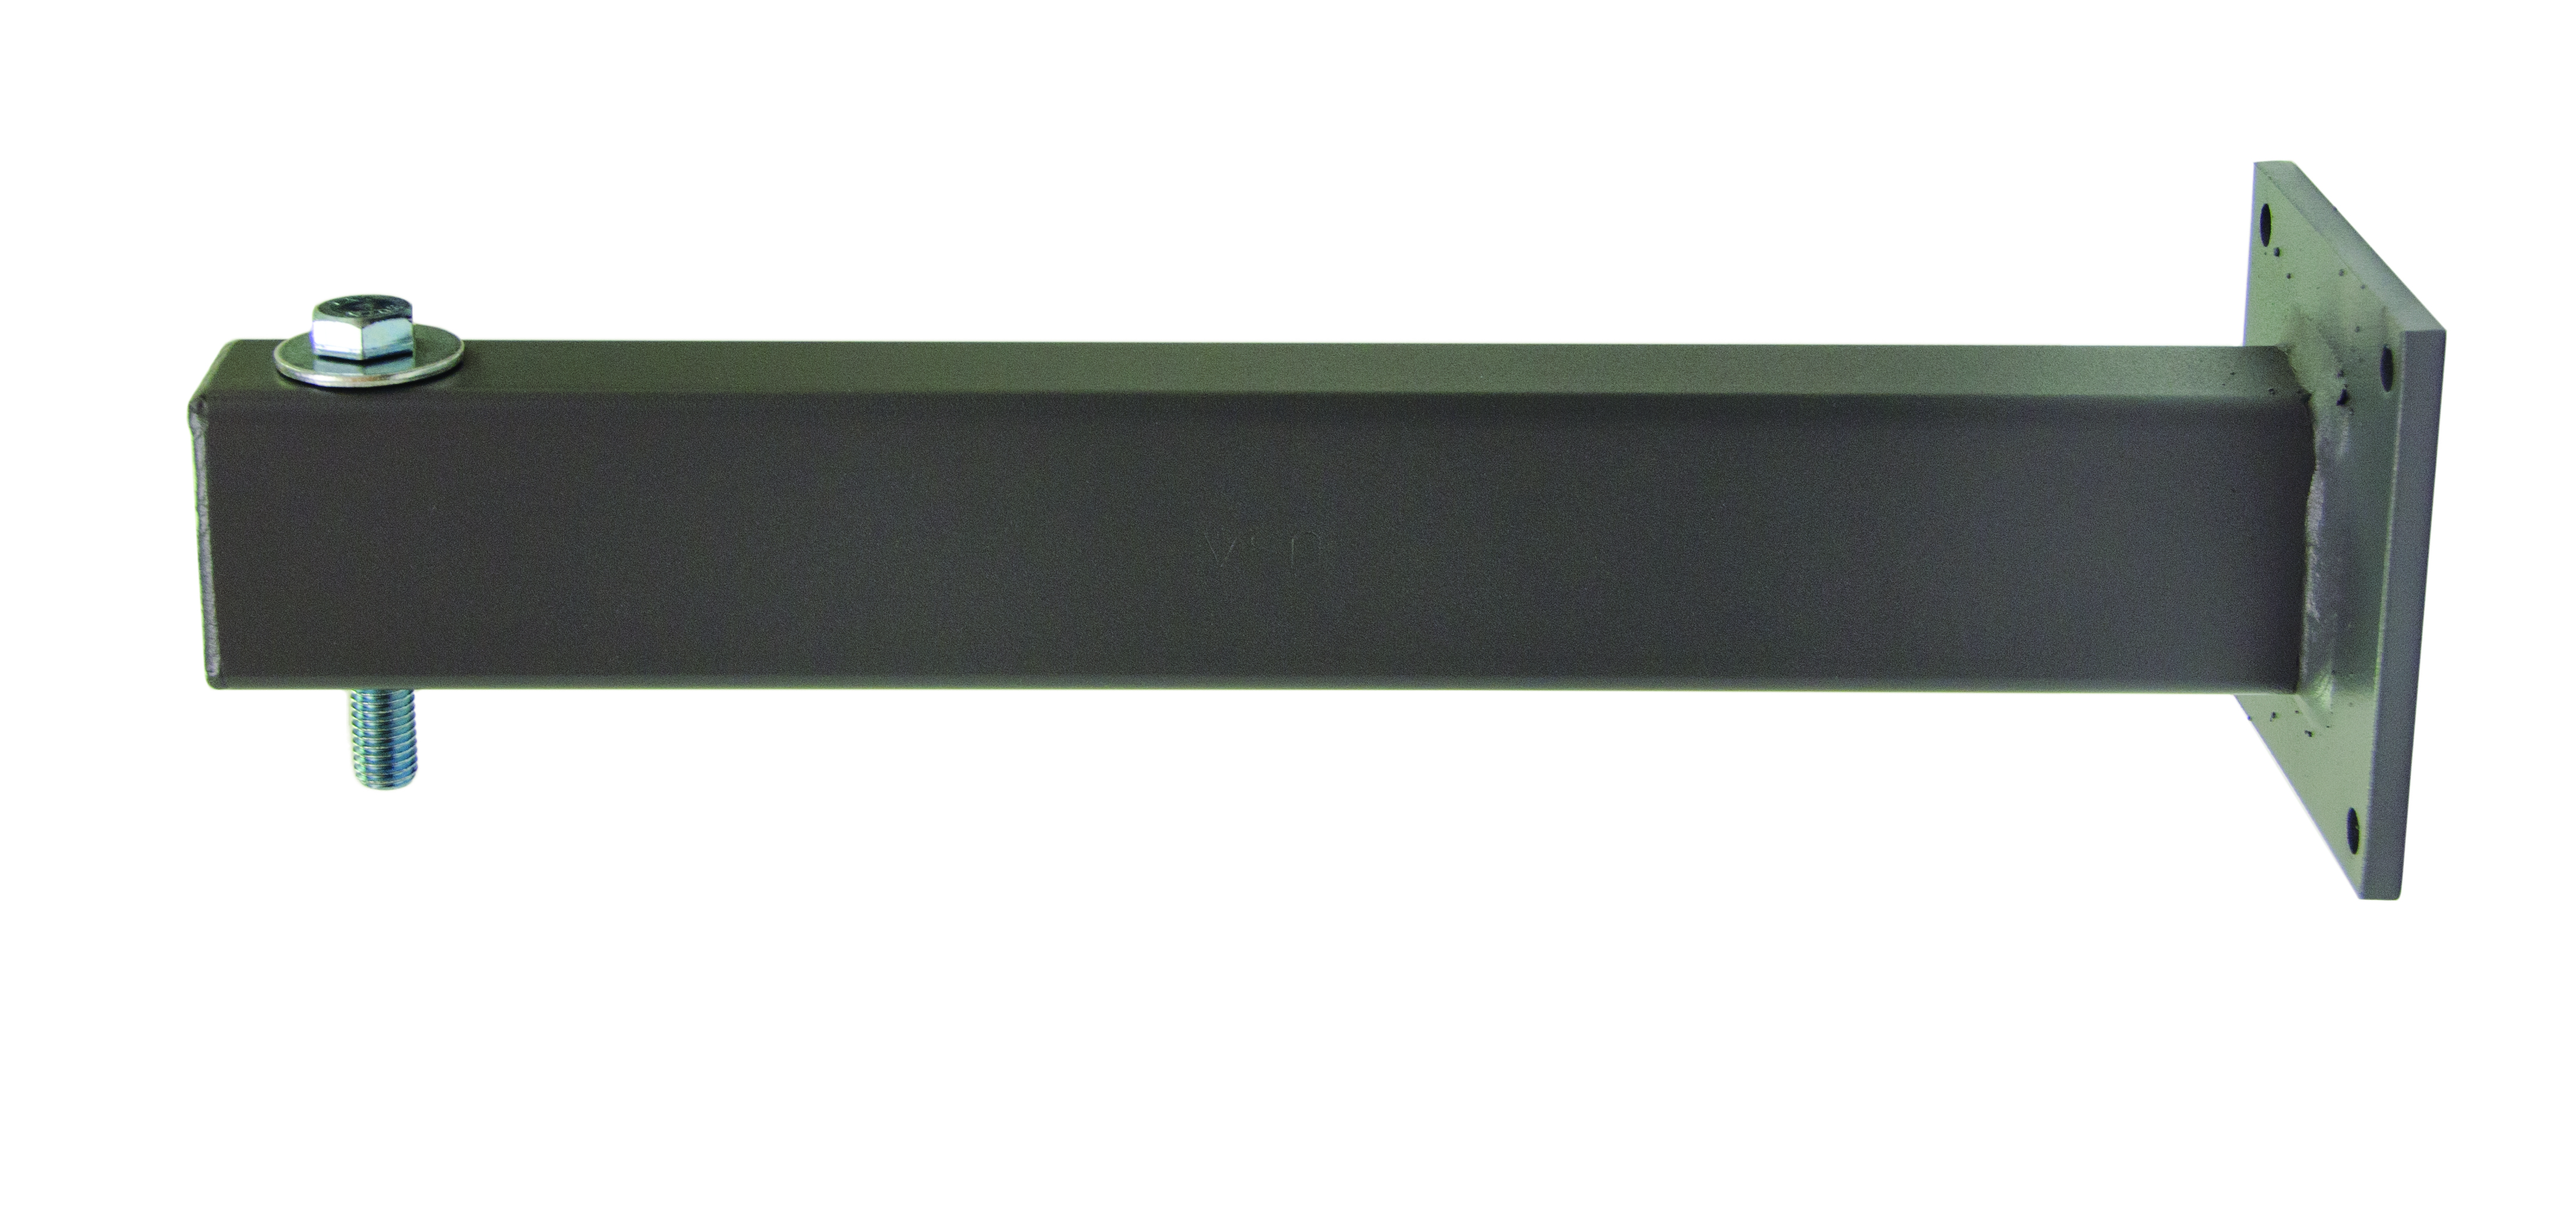 Wall Mounting Bracket, Heavy Duty Epoxy Powder Coated Finish. For Use With 5520 Series Washdown Fan Forced Unit Heater